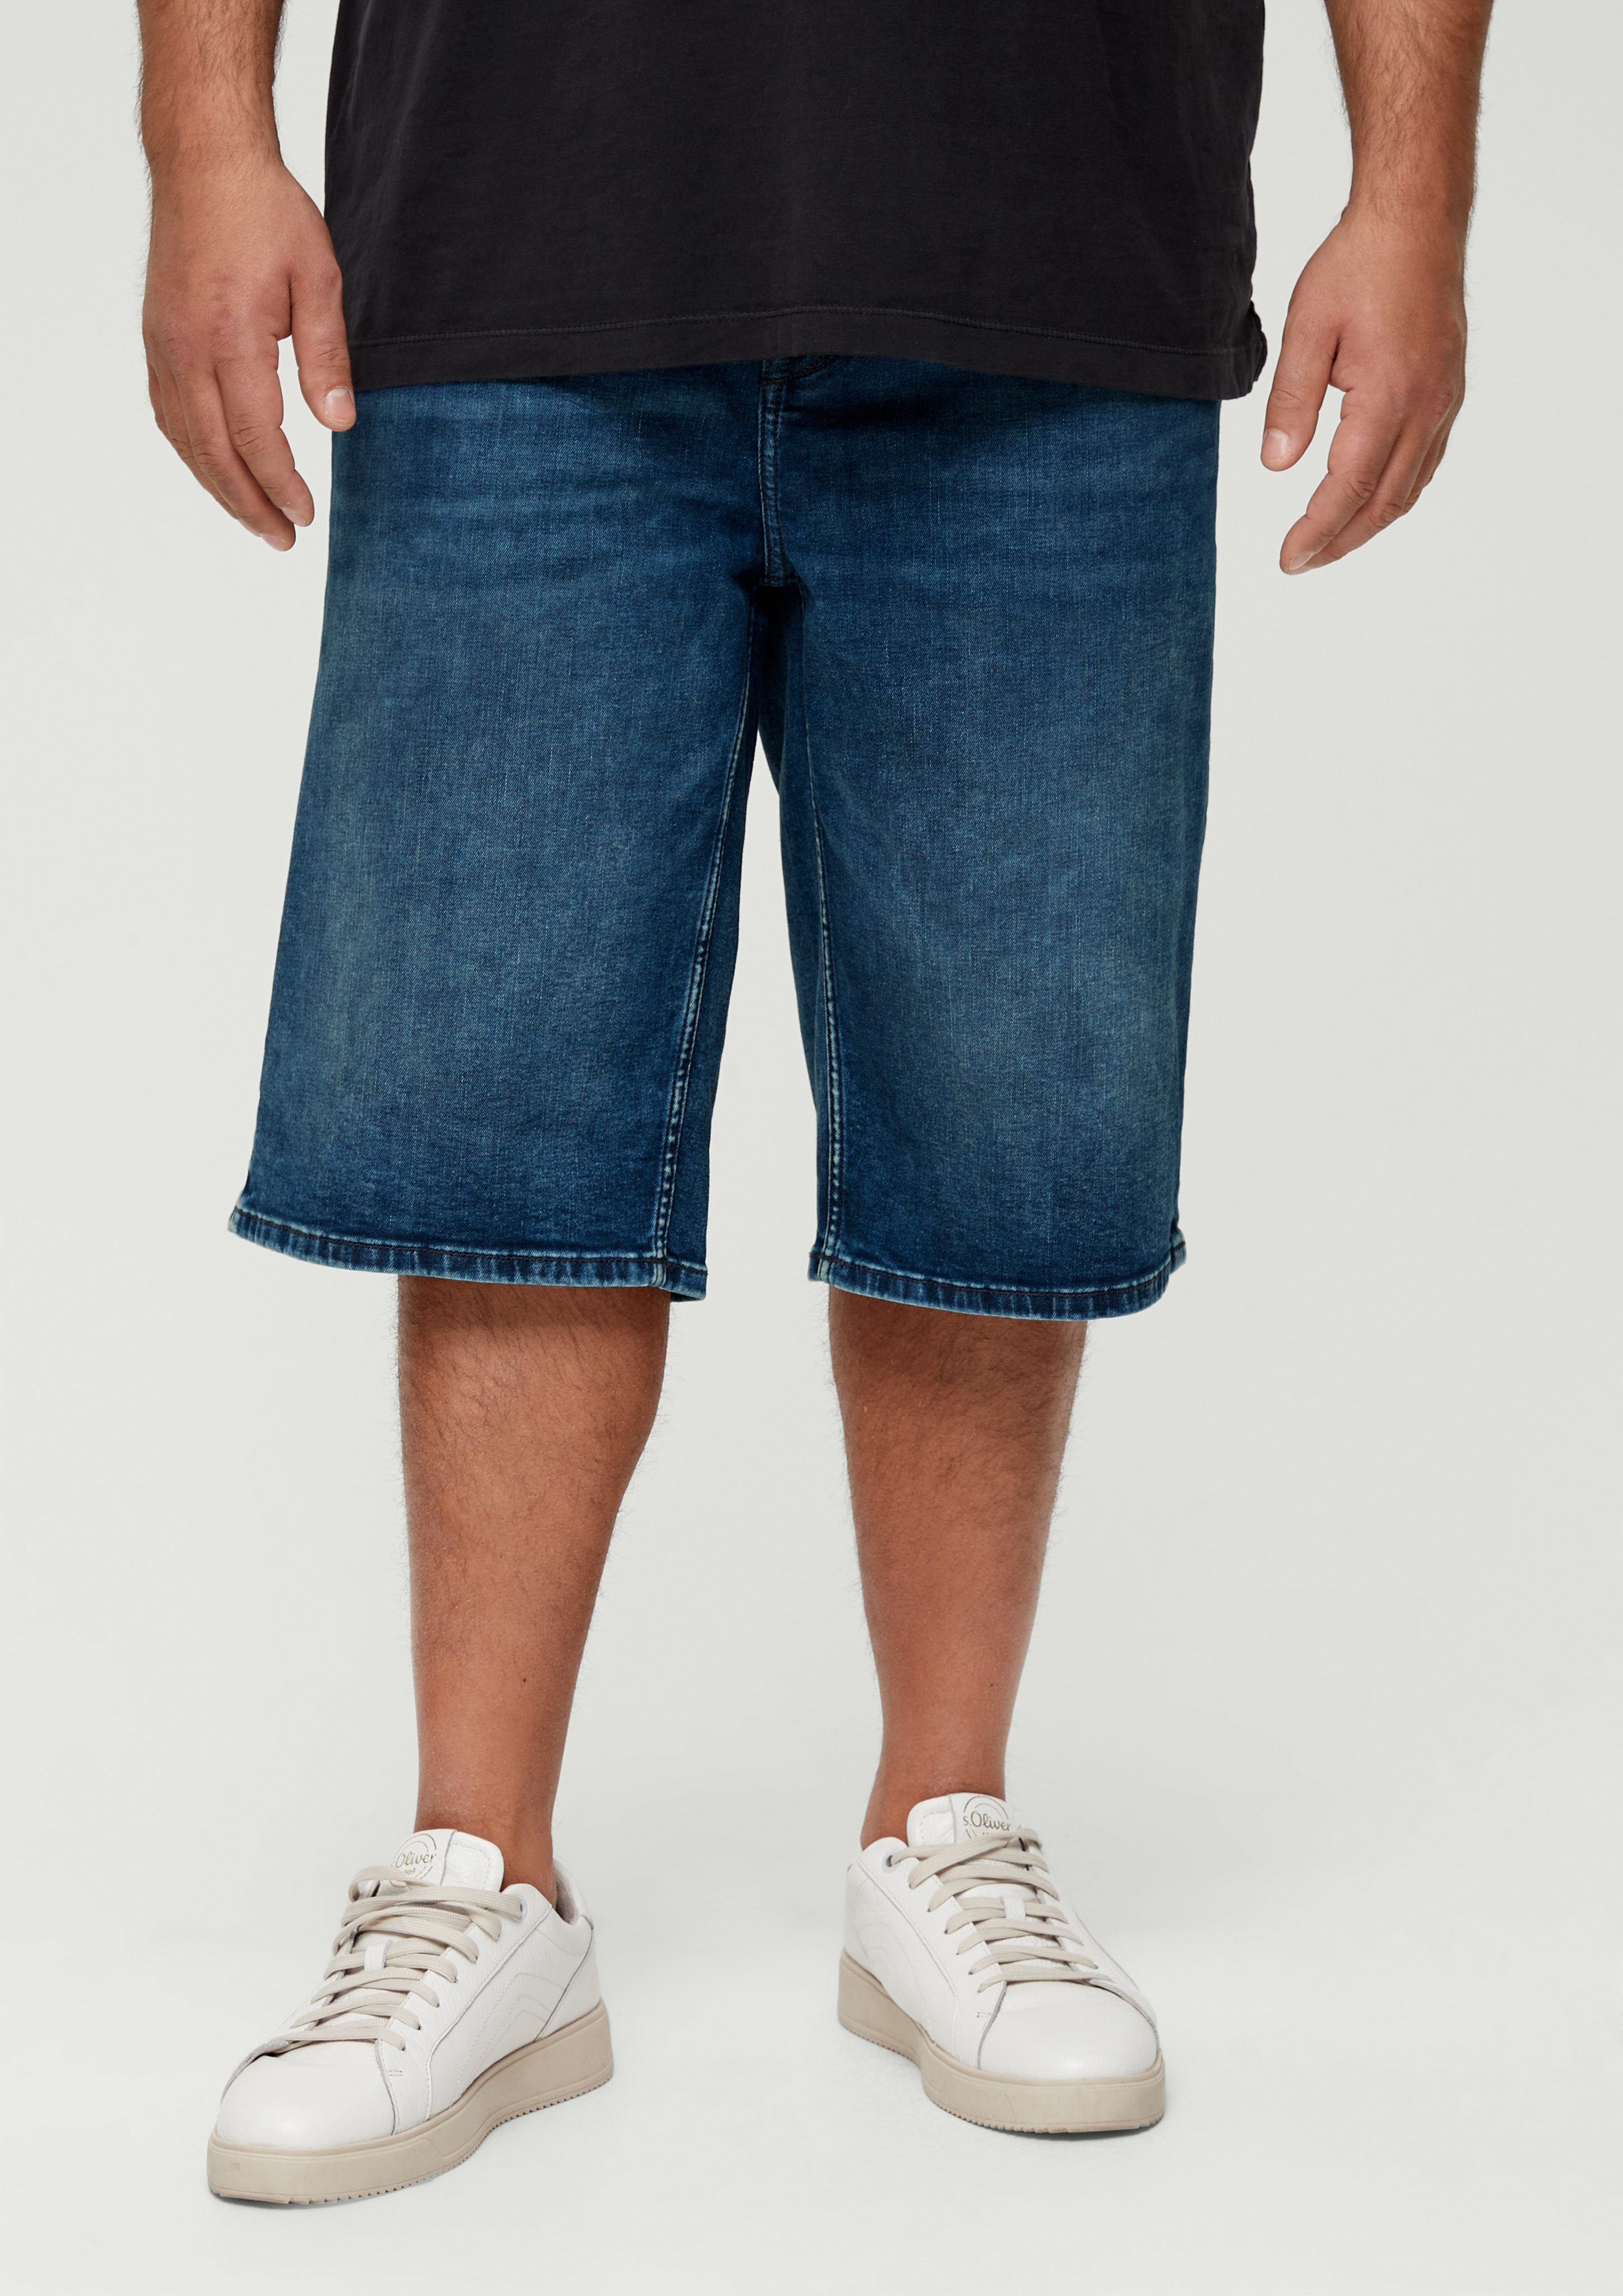 / Relaxed Leg / / Mid s.Oliver ozeanblau Casby Jeans-Bermuda Jeansshorts Waschung Straight Rise Fit